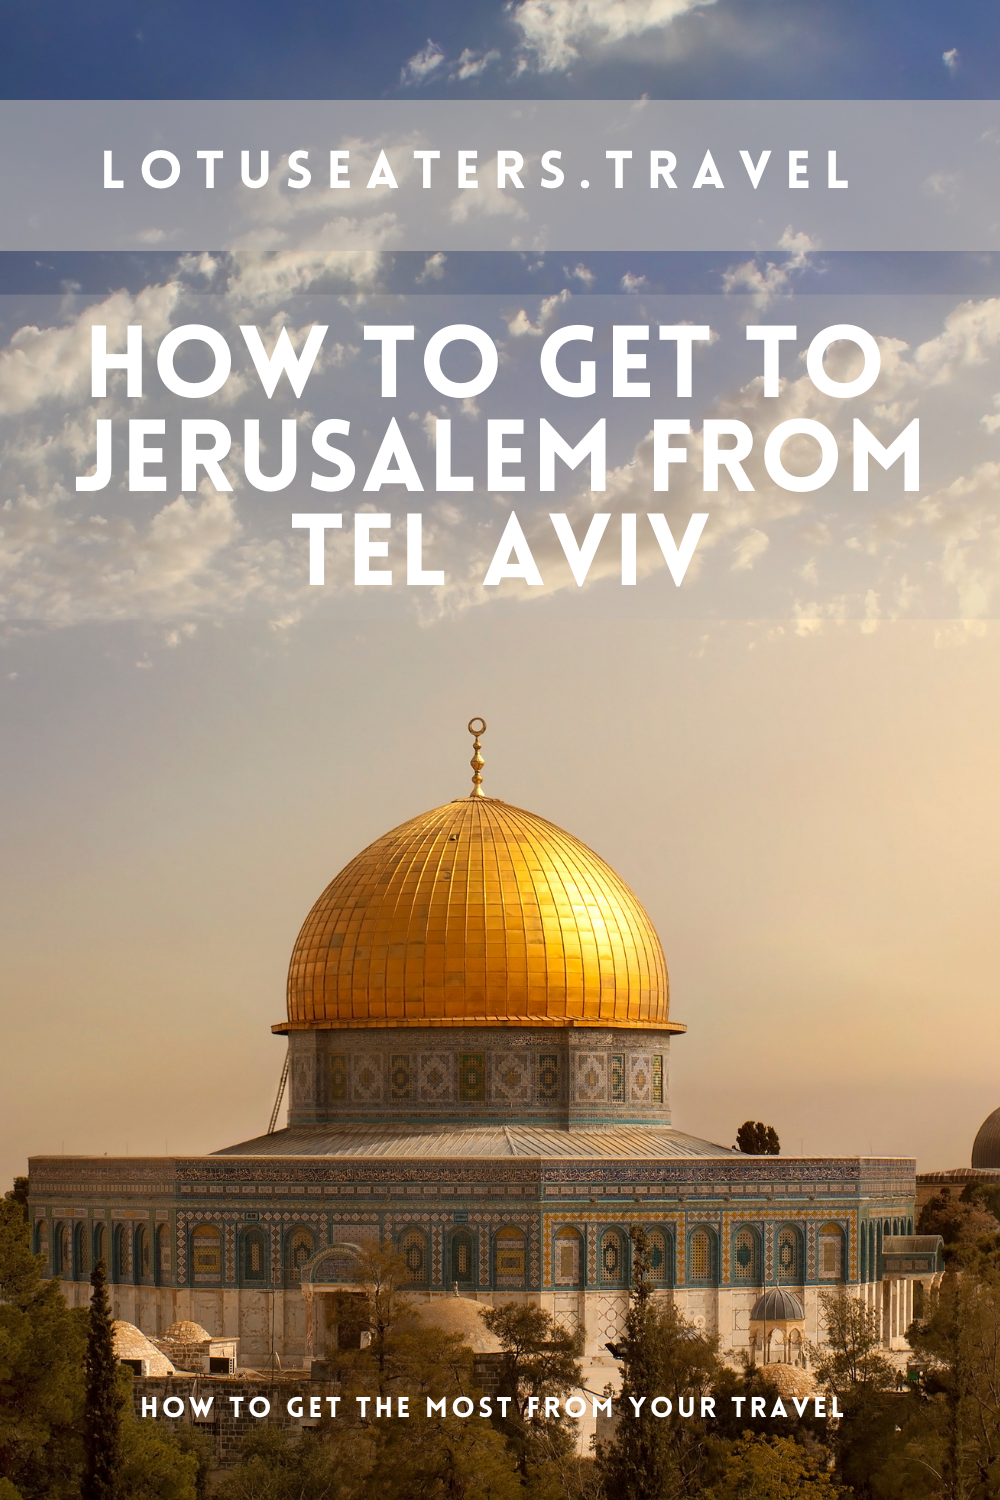 How to get to Jerusalem from Tel aviv